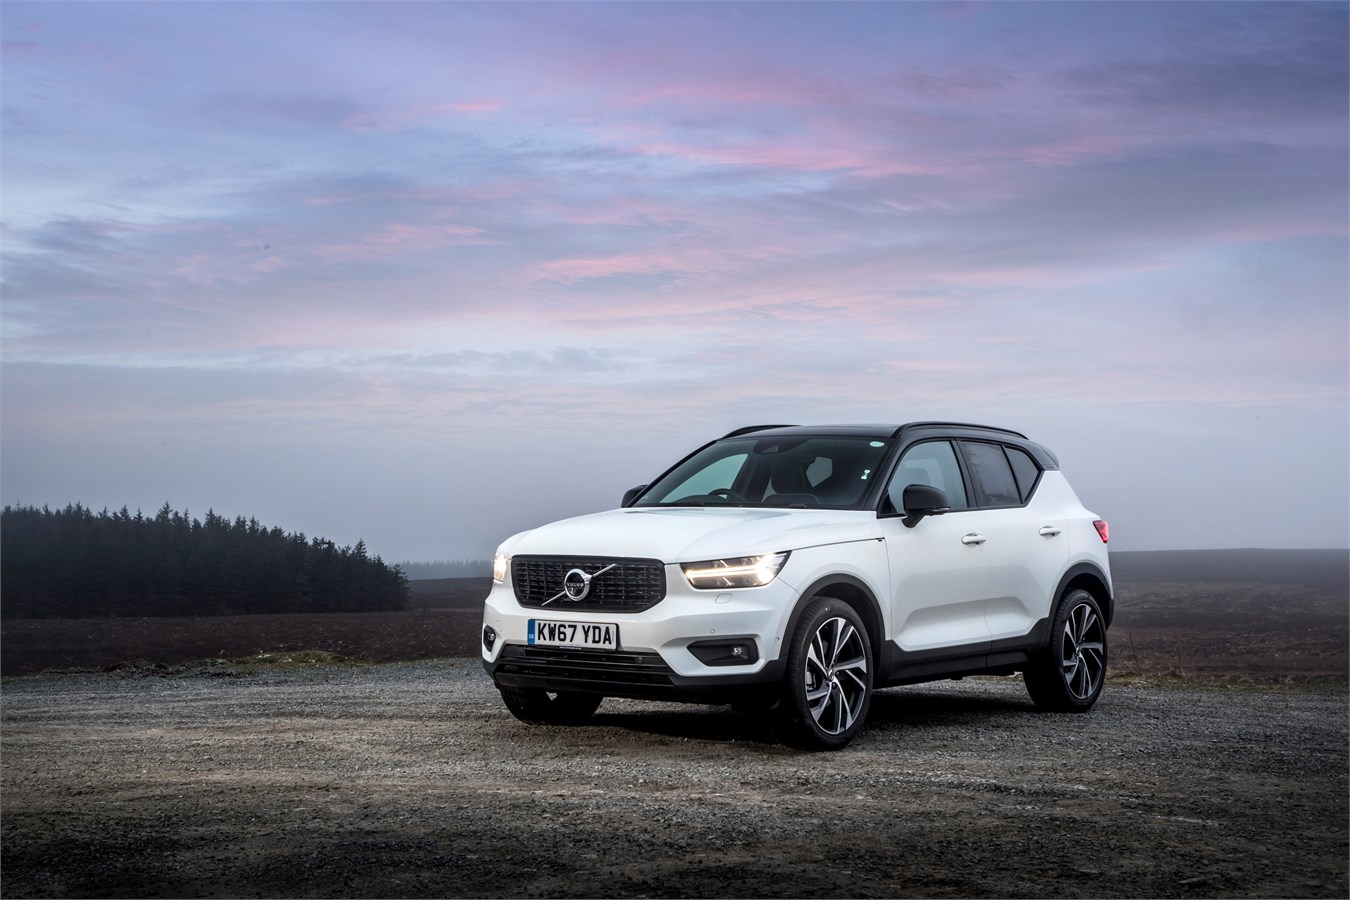 Volvo XC40 crowned What Car? Car of the Year - Volvo Car UK Media Newsroom